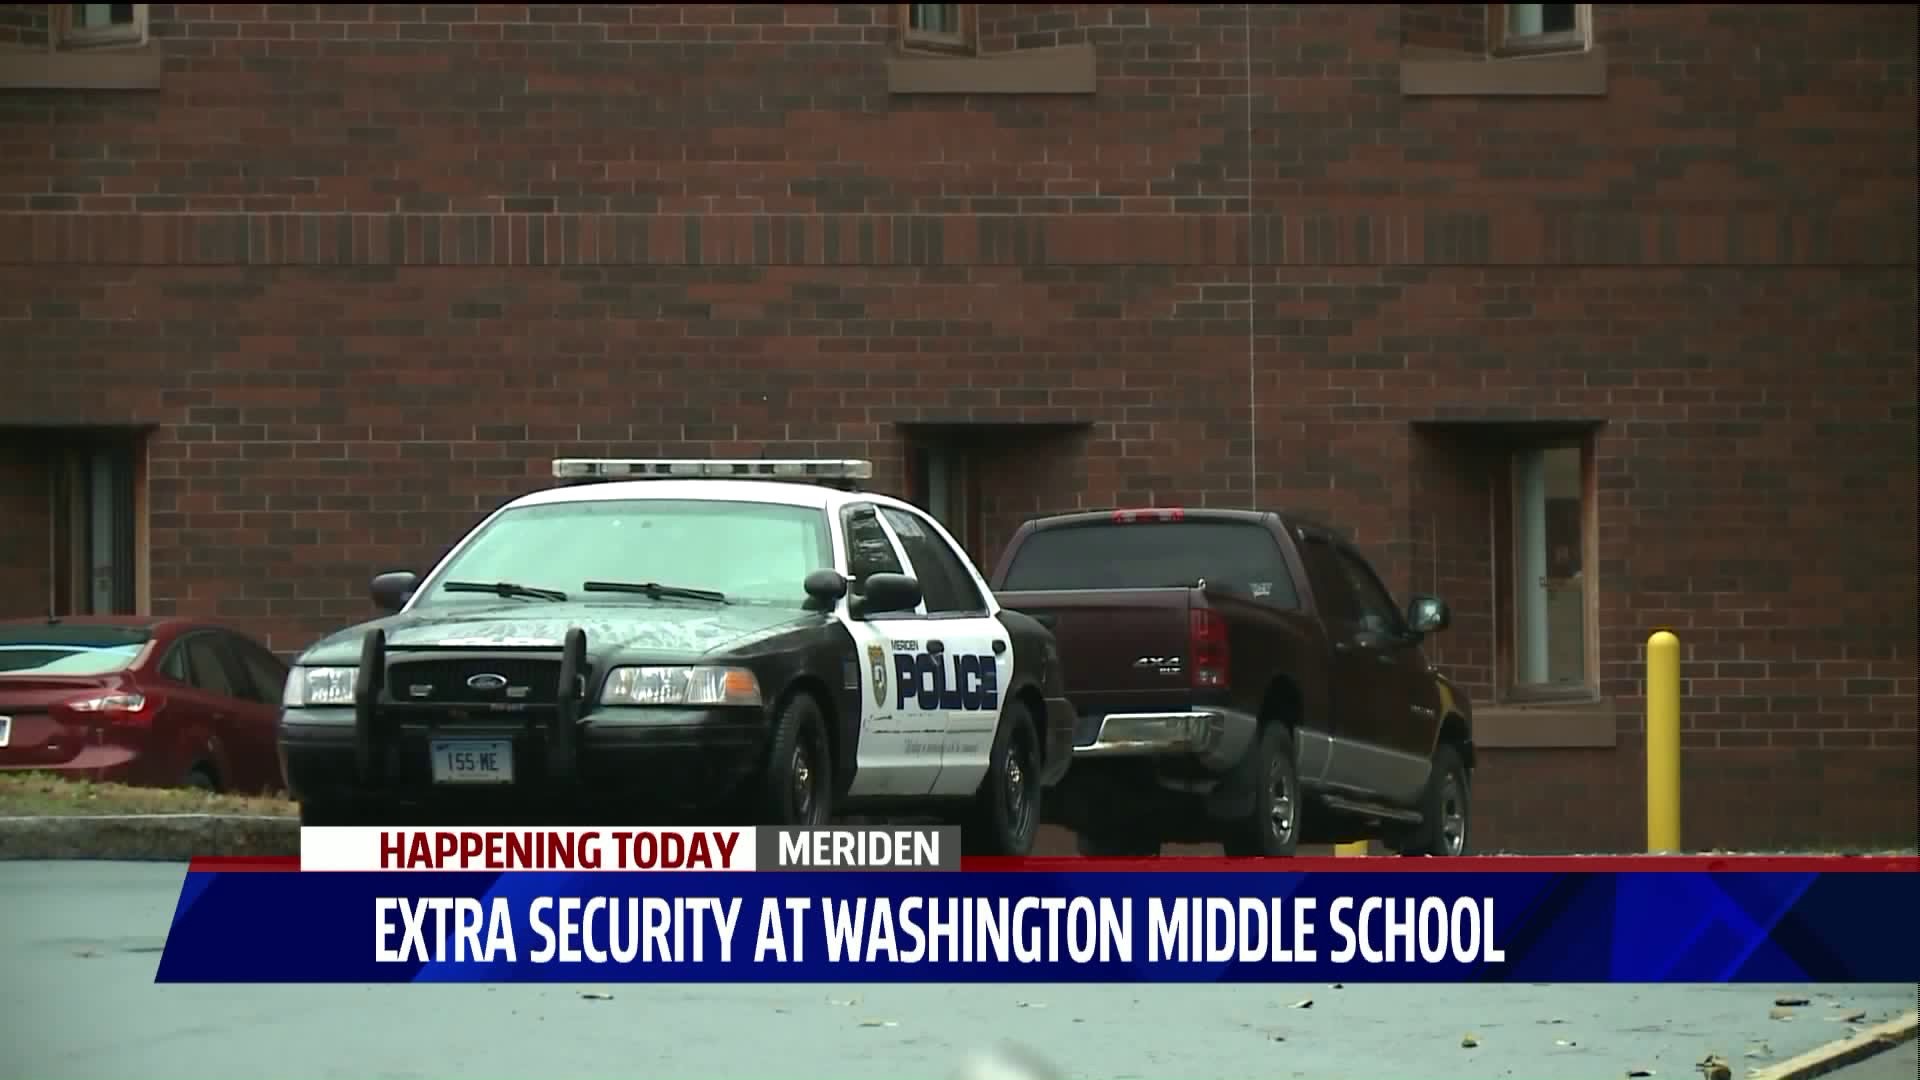 Extra security at Washington Middle School